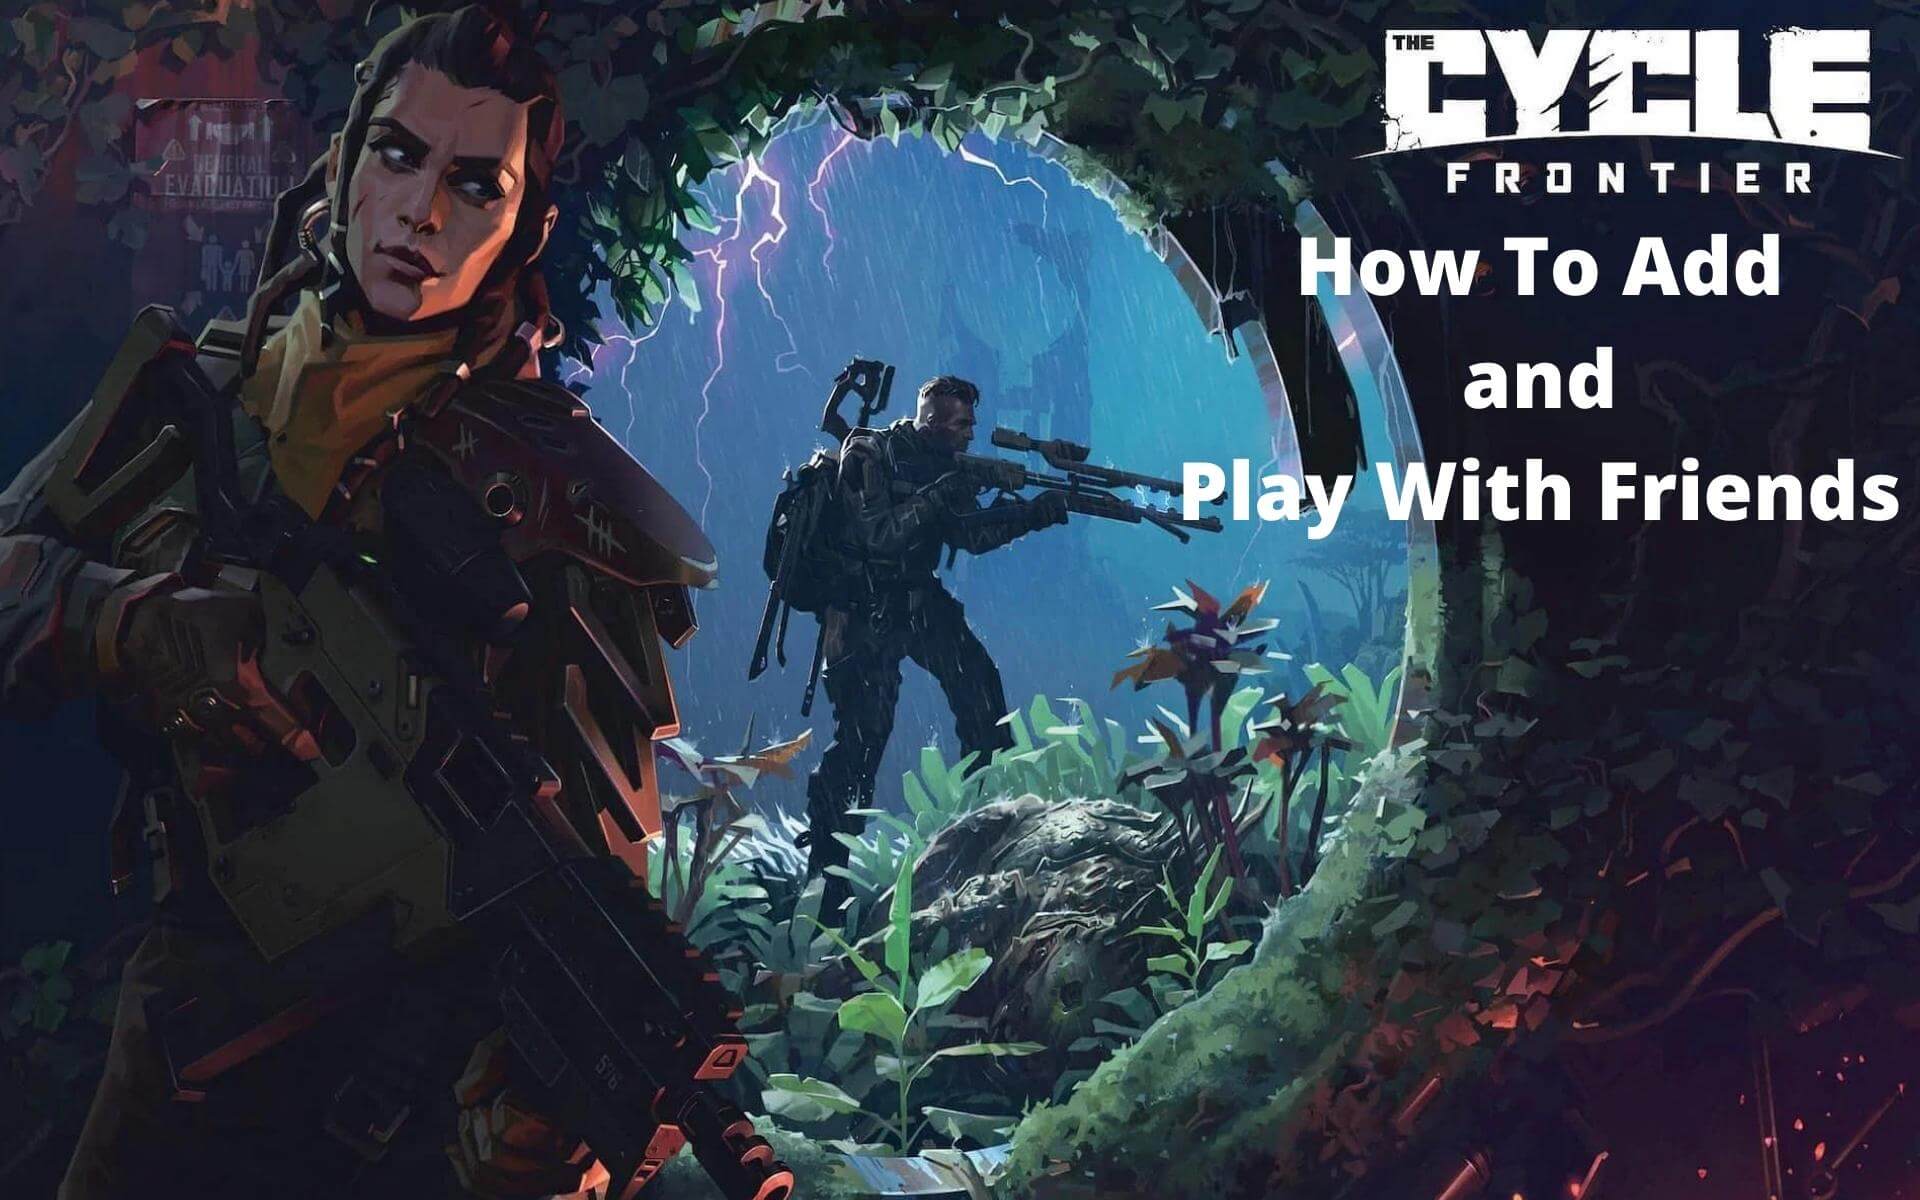 How To Add and Play With Friends On The Cycle Frontier